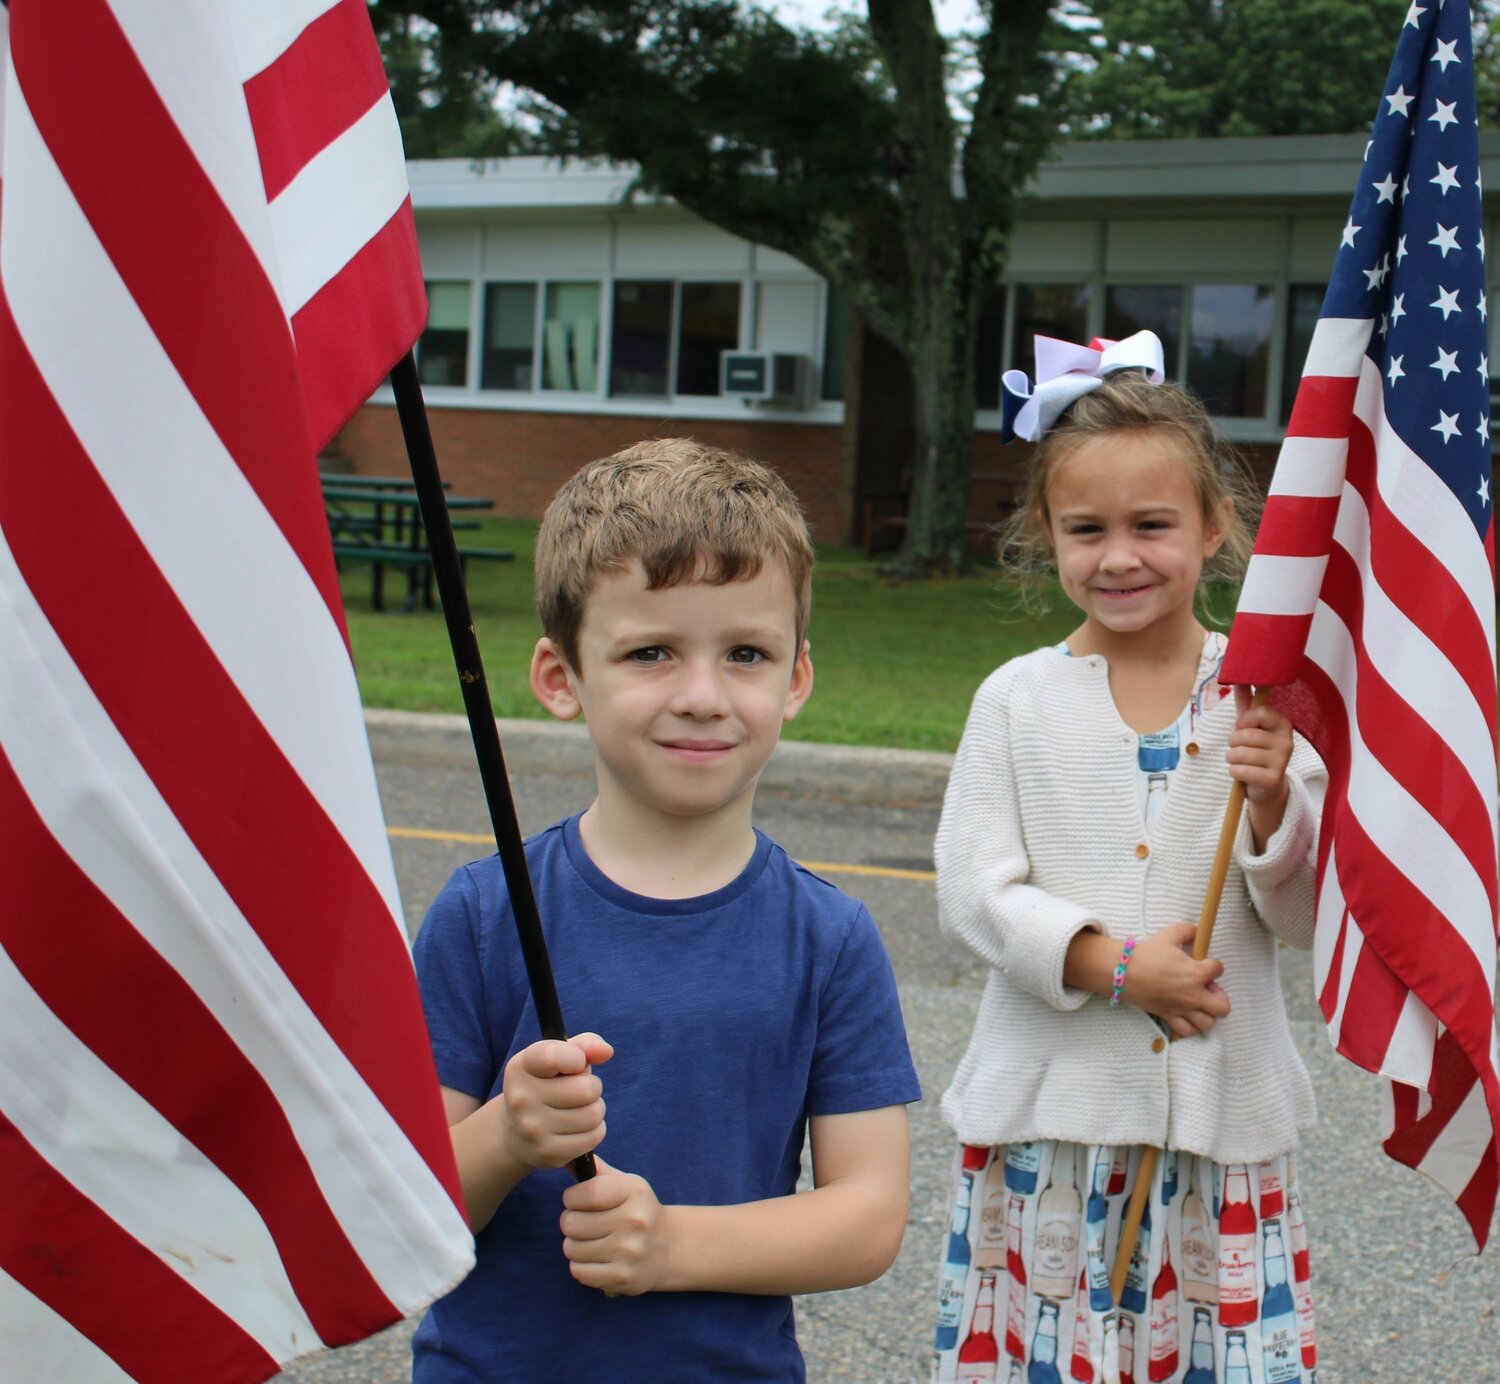 Ann MacArthur Primary School students Bryce Giraldi, left, and Emersyn Maher waved their flags during the ceremony.